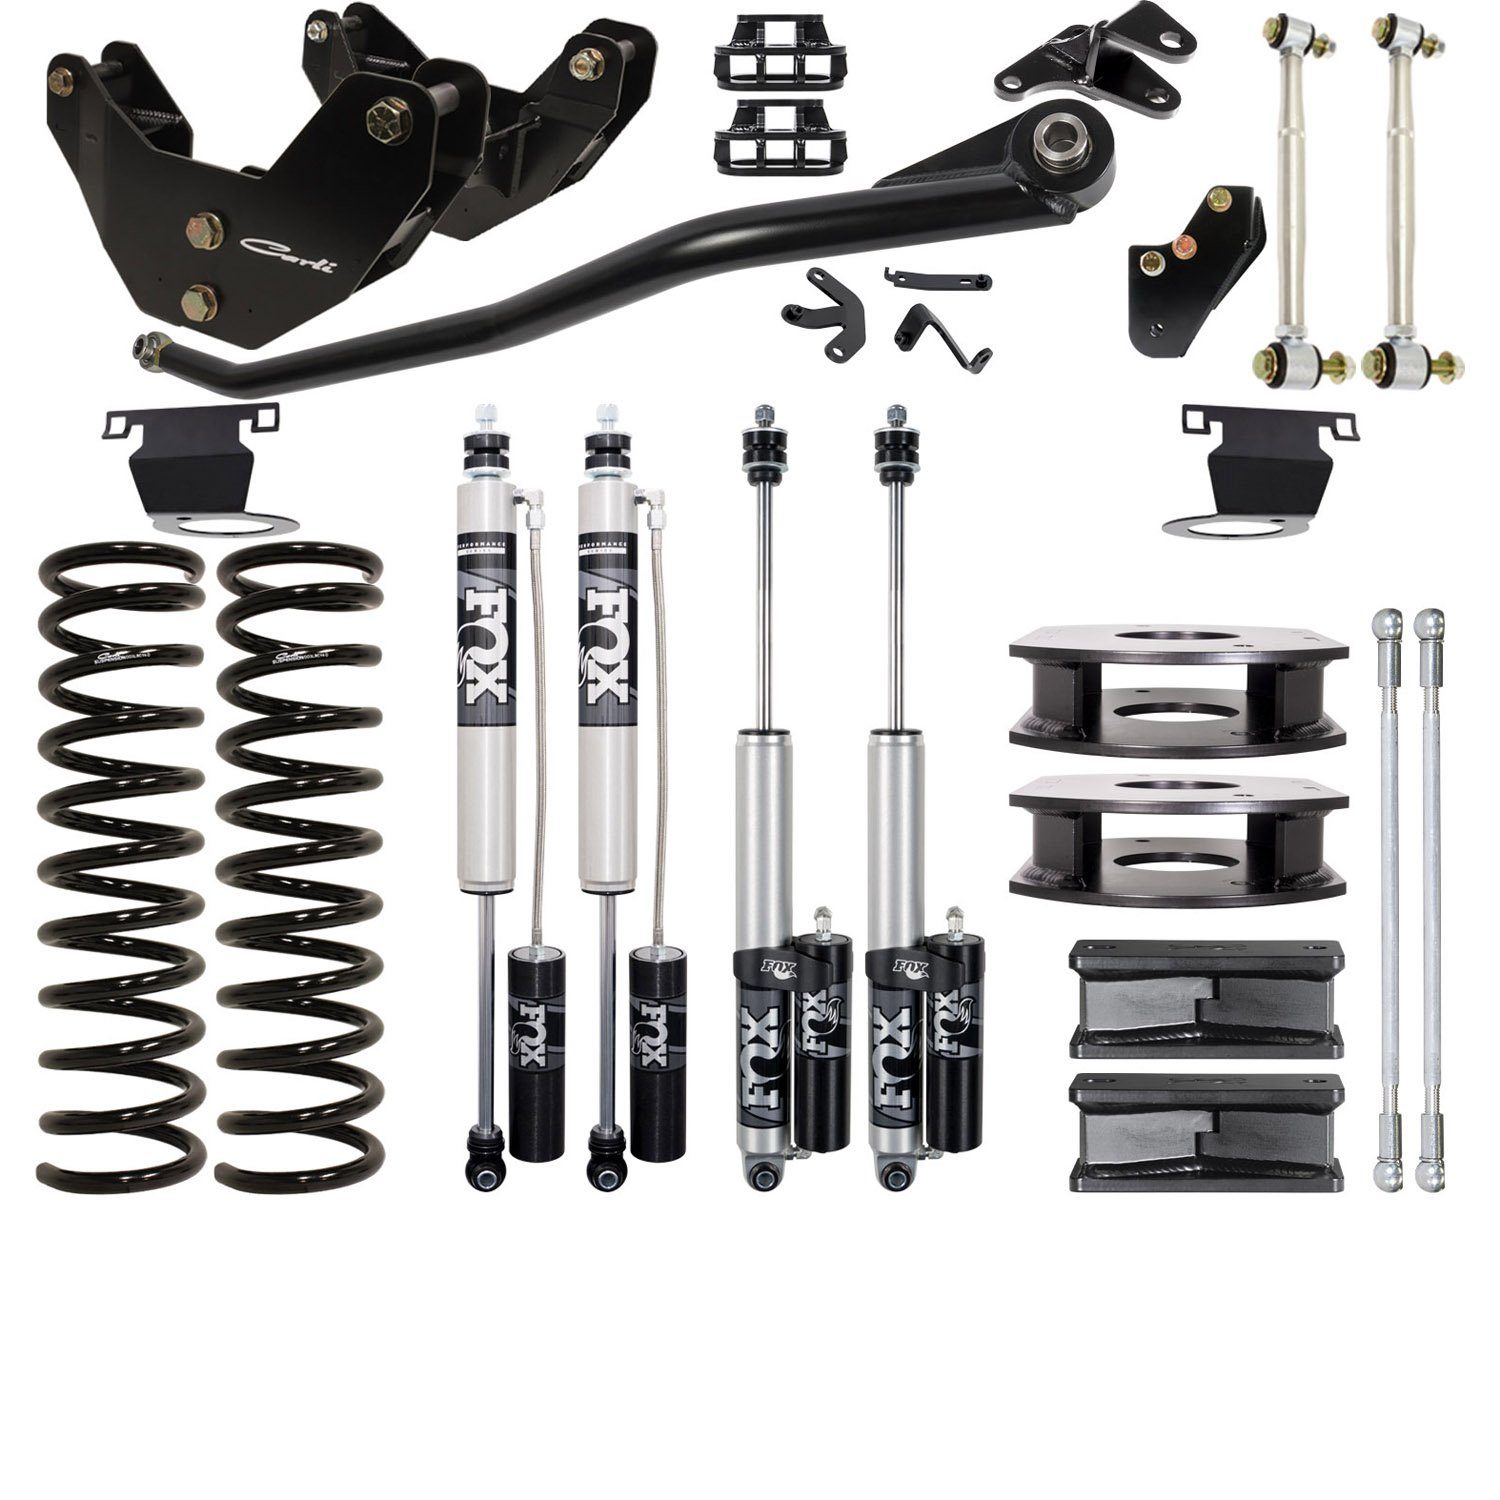 '19-23 Ram 2500 Air Ride Backcountry Suspension System-3.25" Lift  Carli Suspension parts